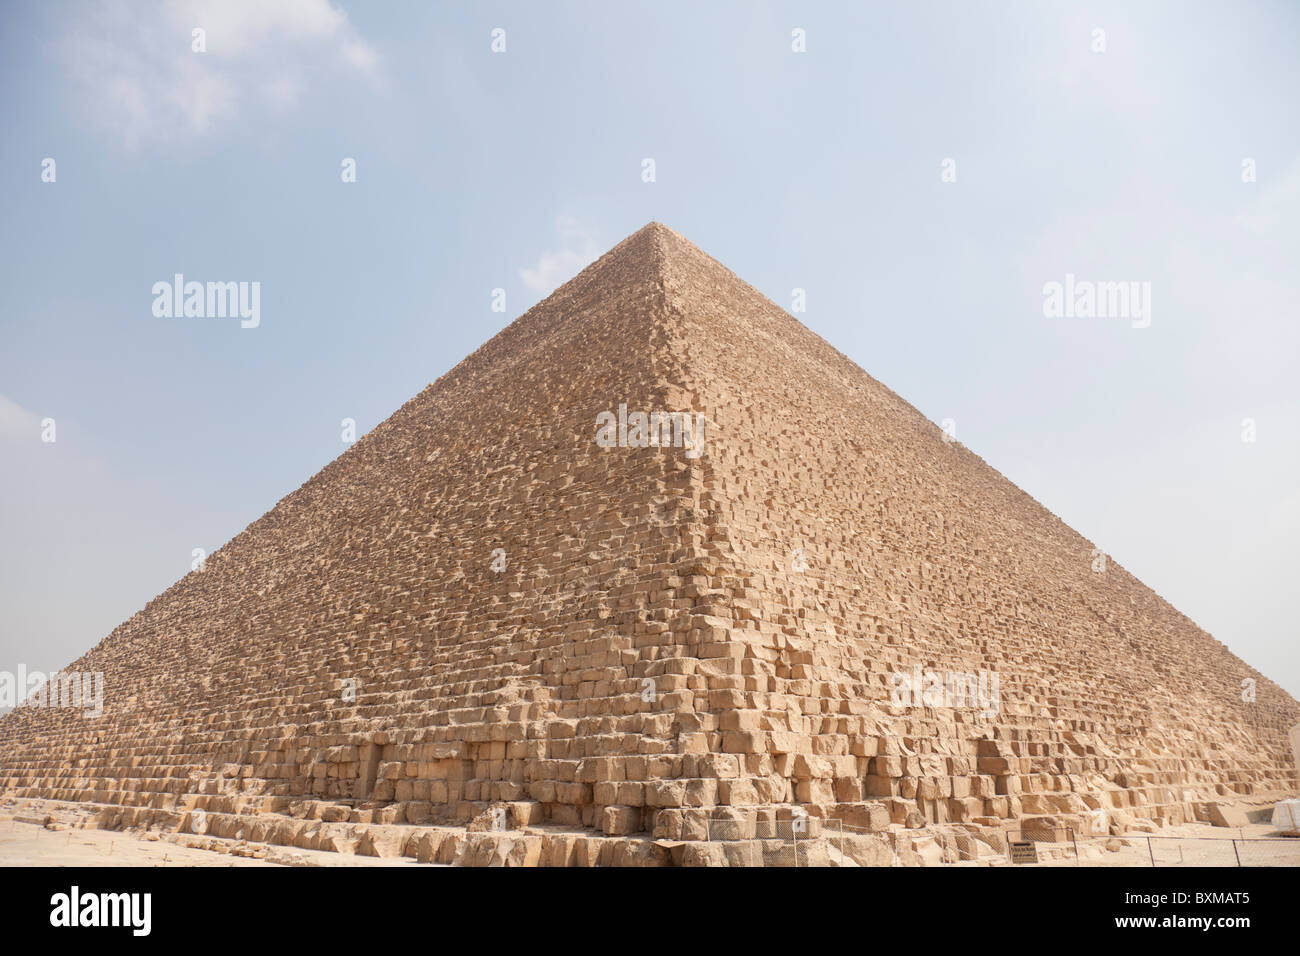 The whole view of the Great Pyramid of Giza, with nobody in it. Stock Photo